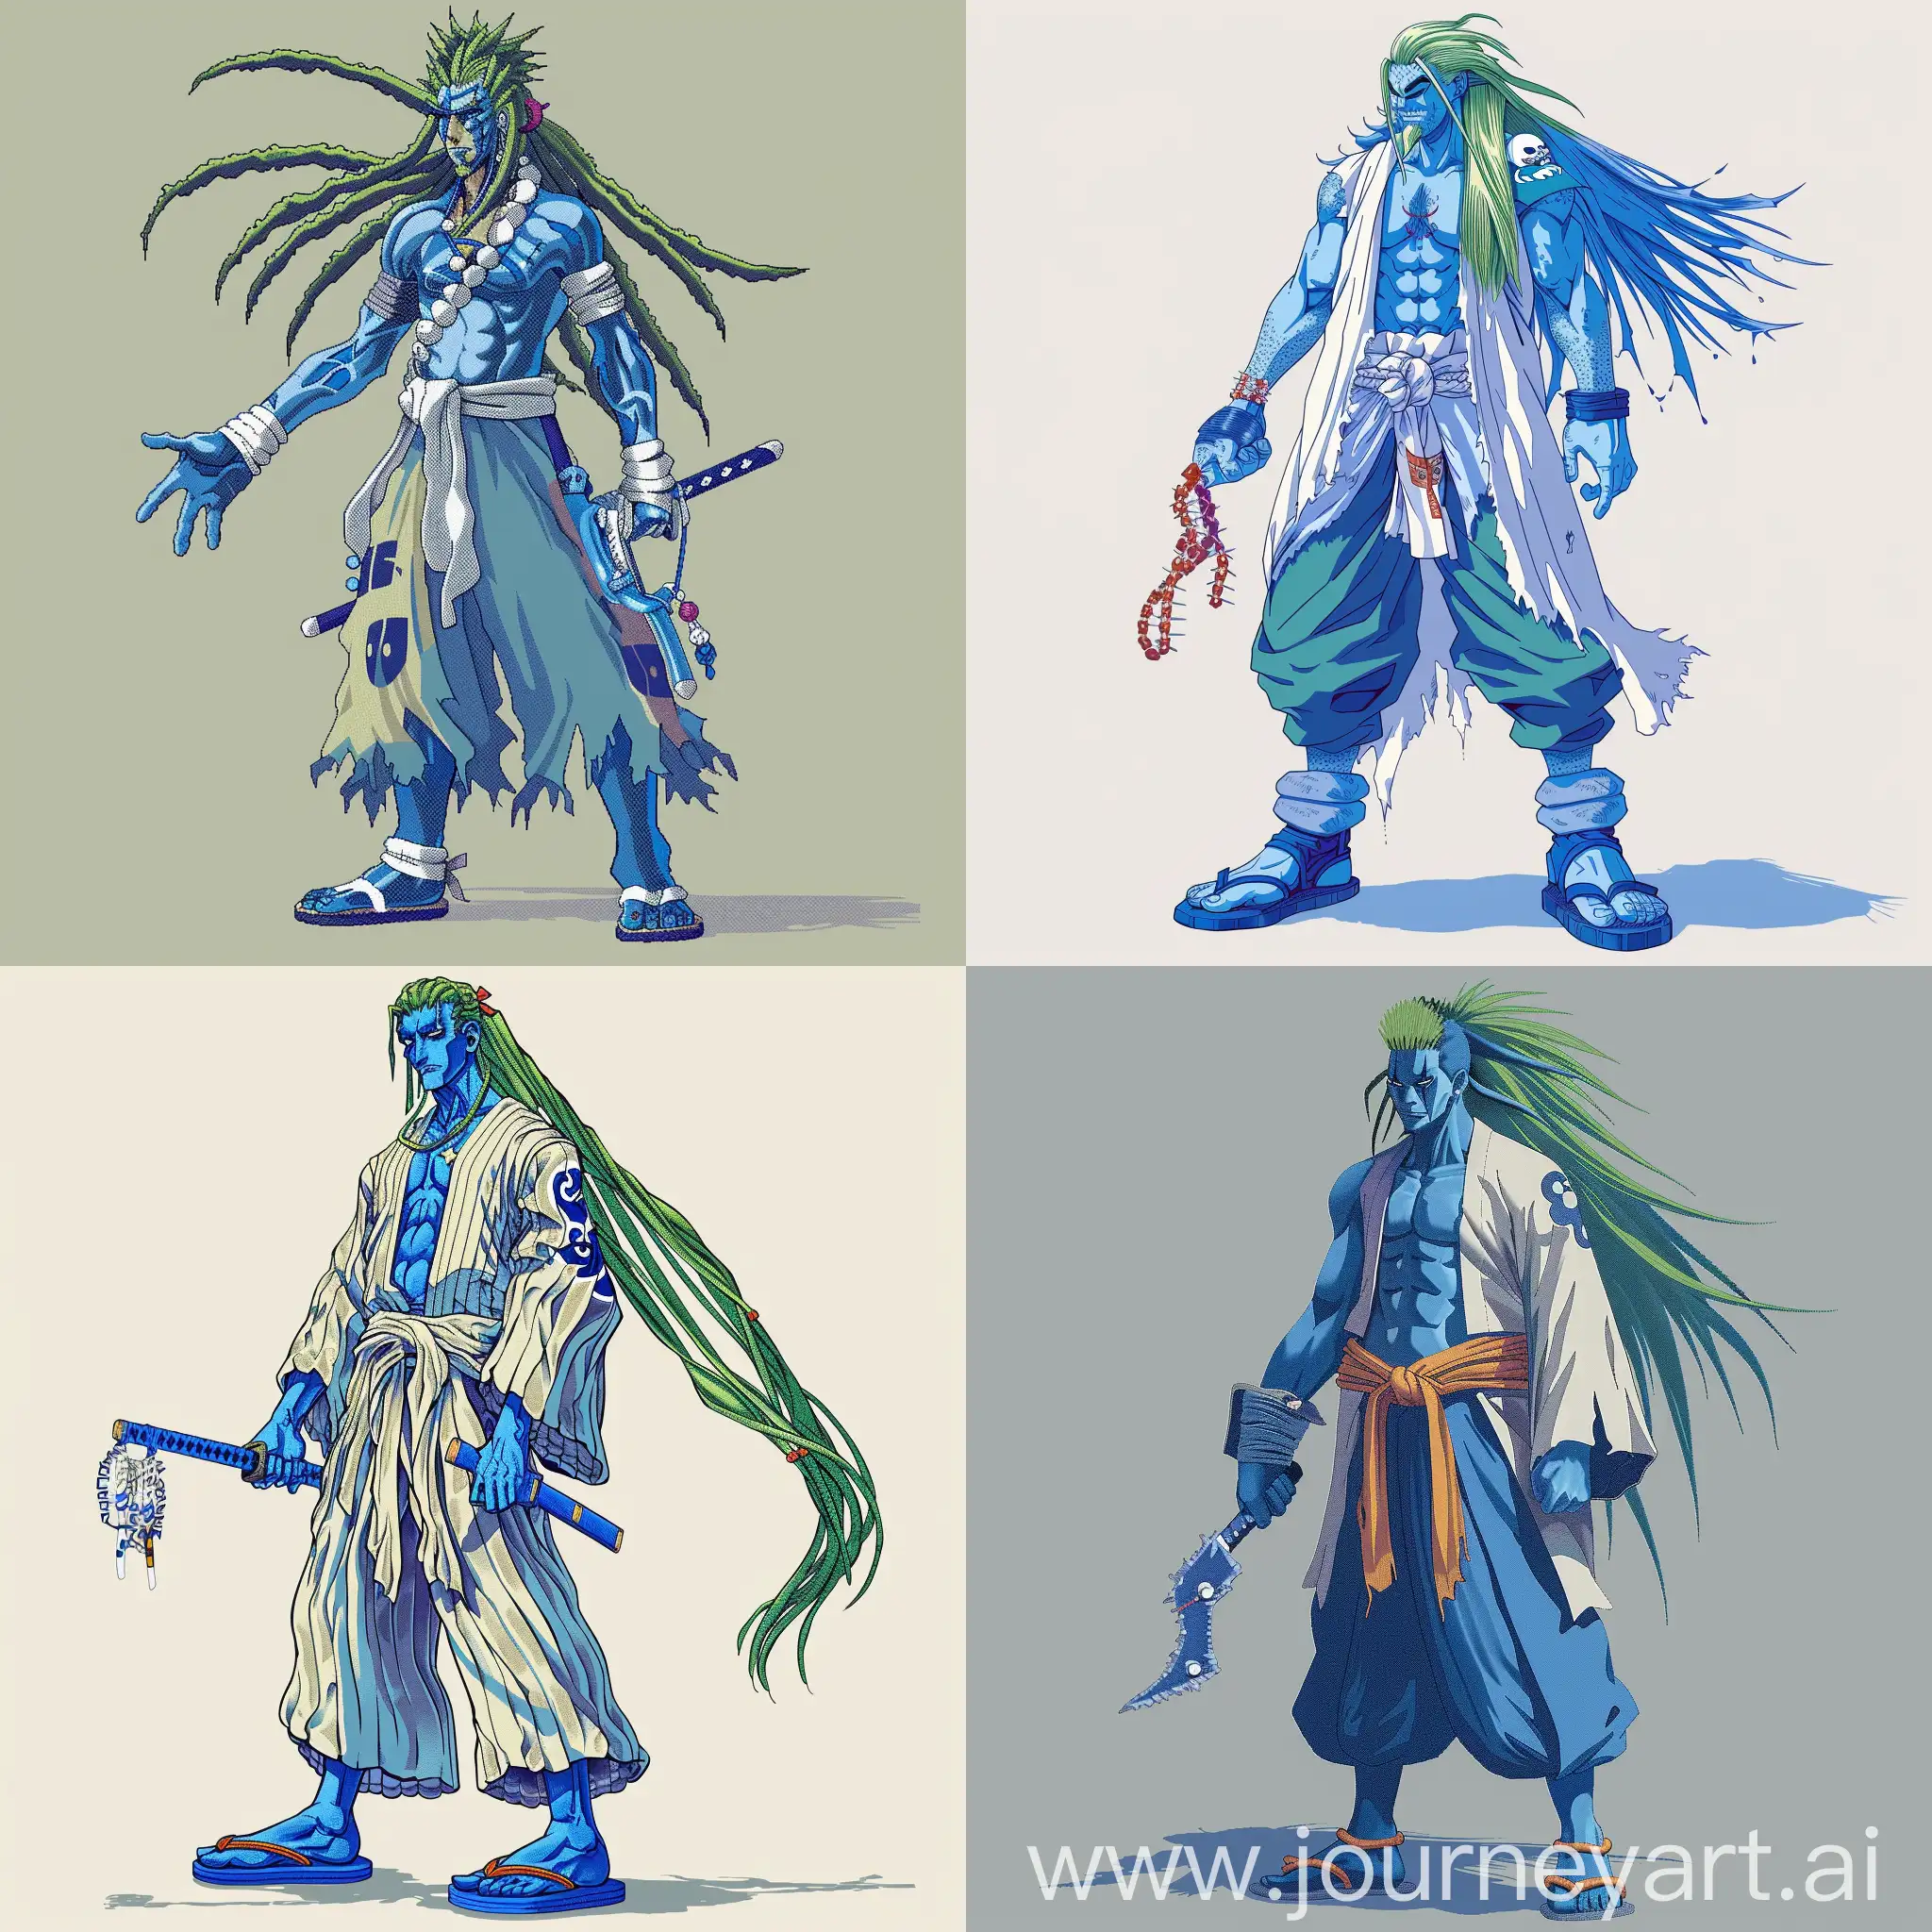 Create a 64 bit pixel detailed character art featuring a man with blue skin, long greenish hair, Blue shoes, bleach style costume and a zanpakuto in hand 